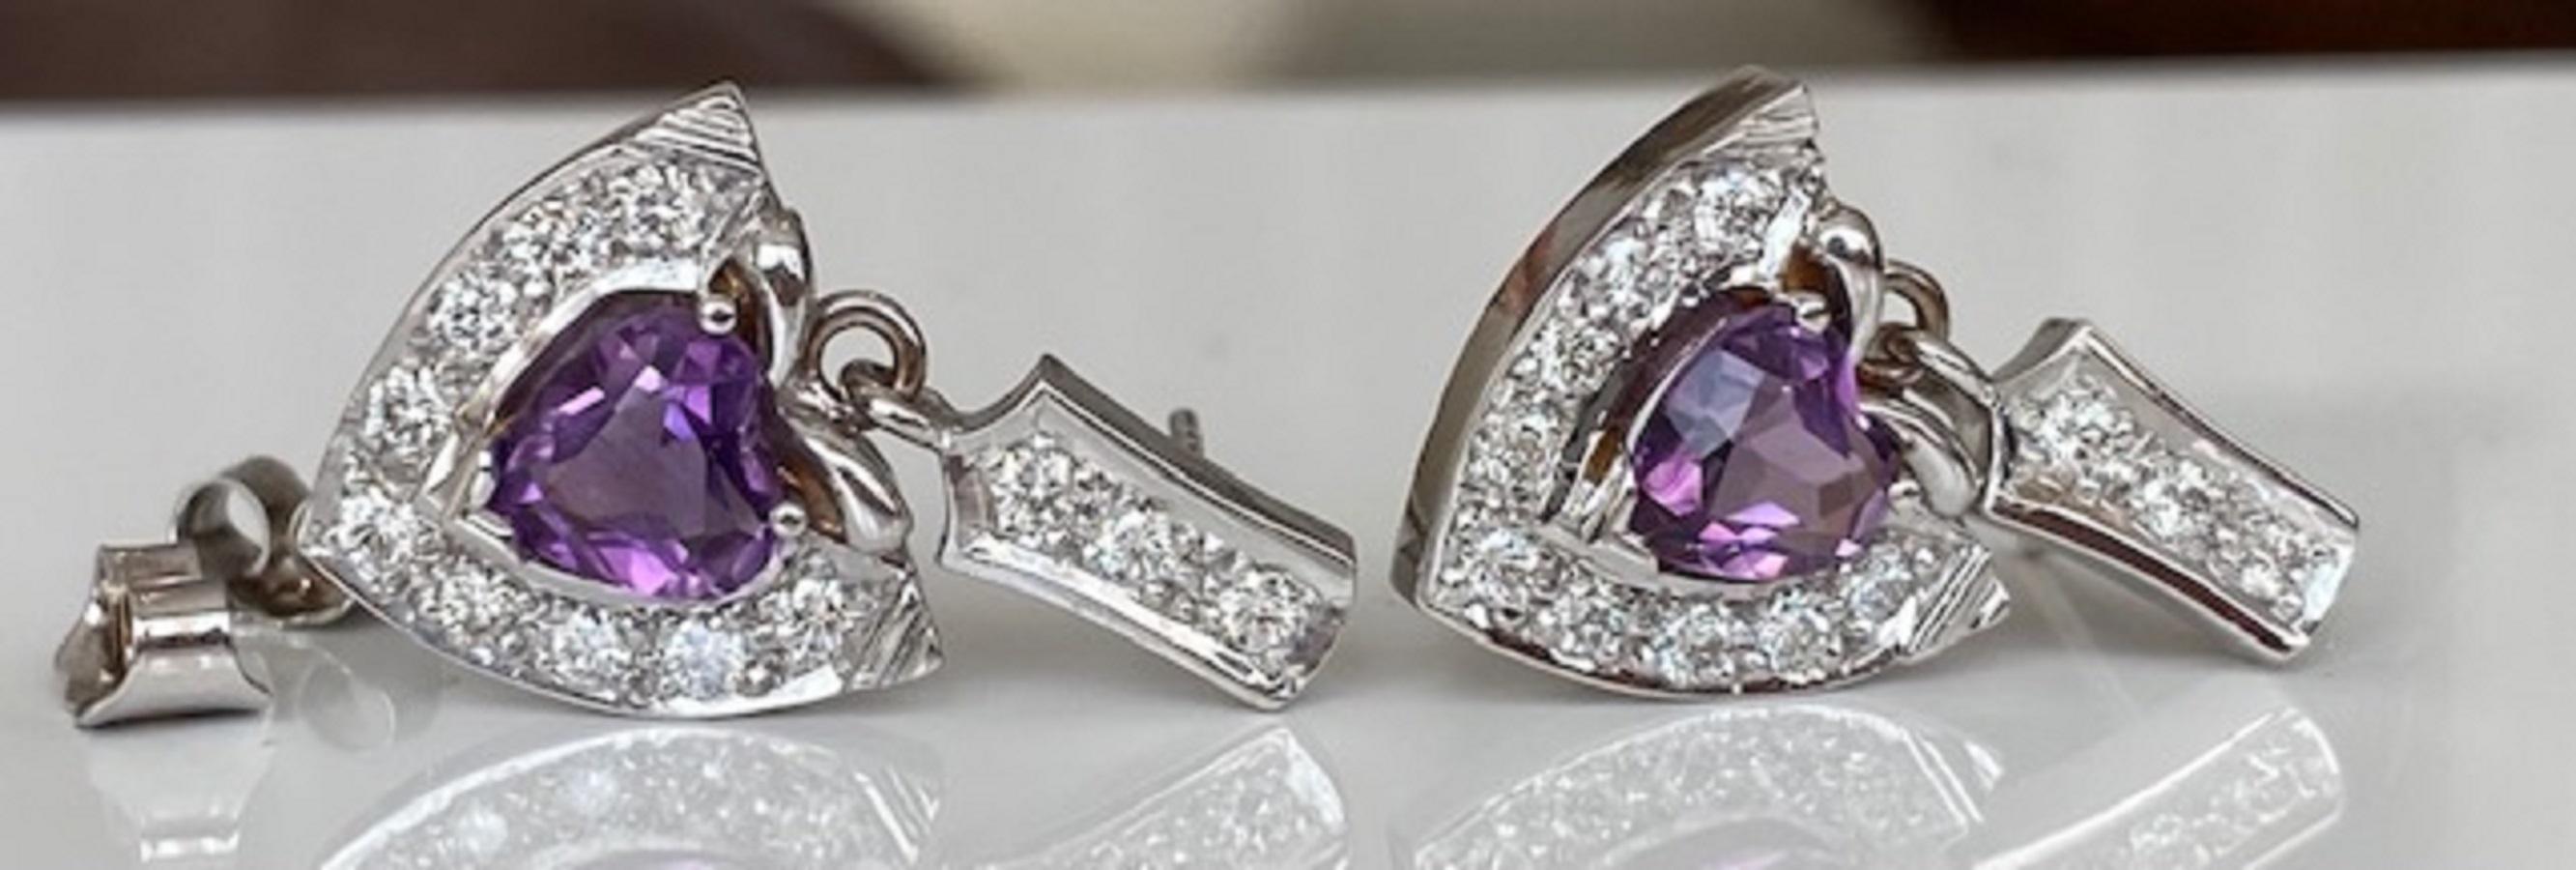 Women's Vintage 18 kt white gold Diamond Dangle earrings studs with Amethyst For Sale